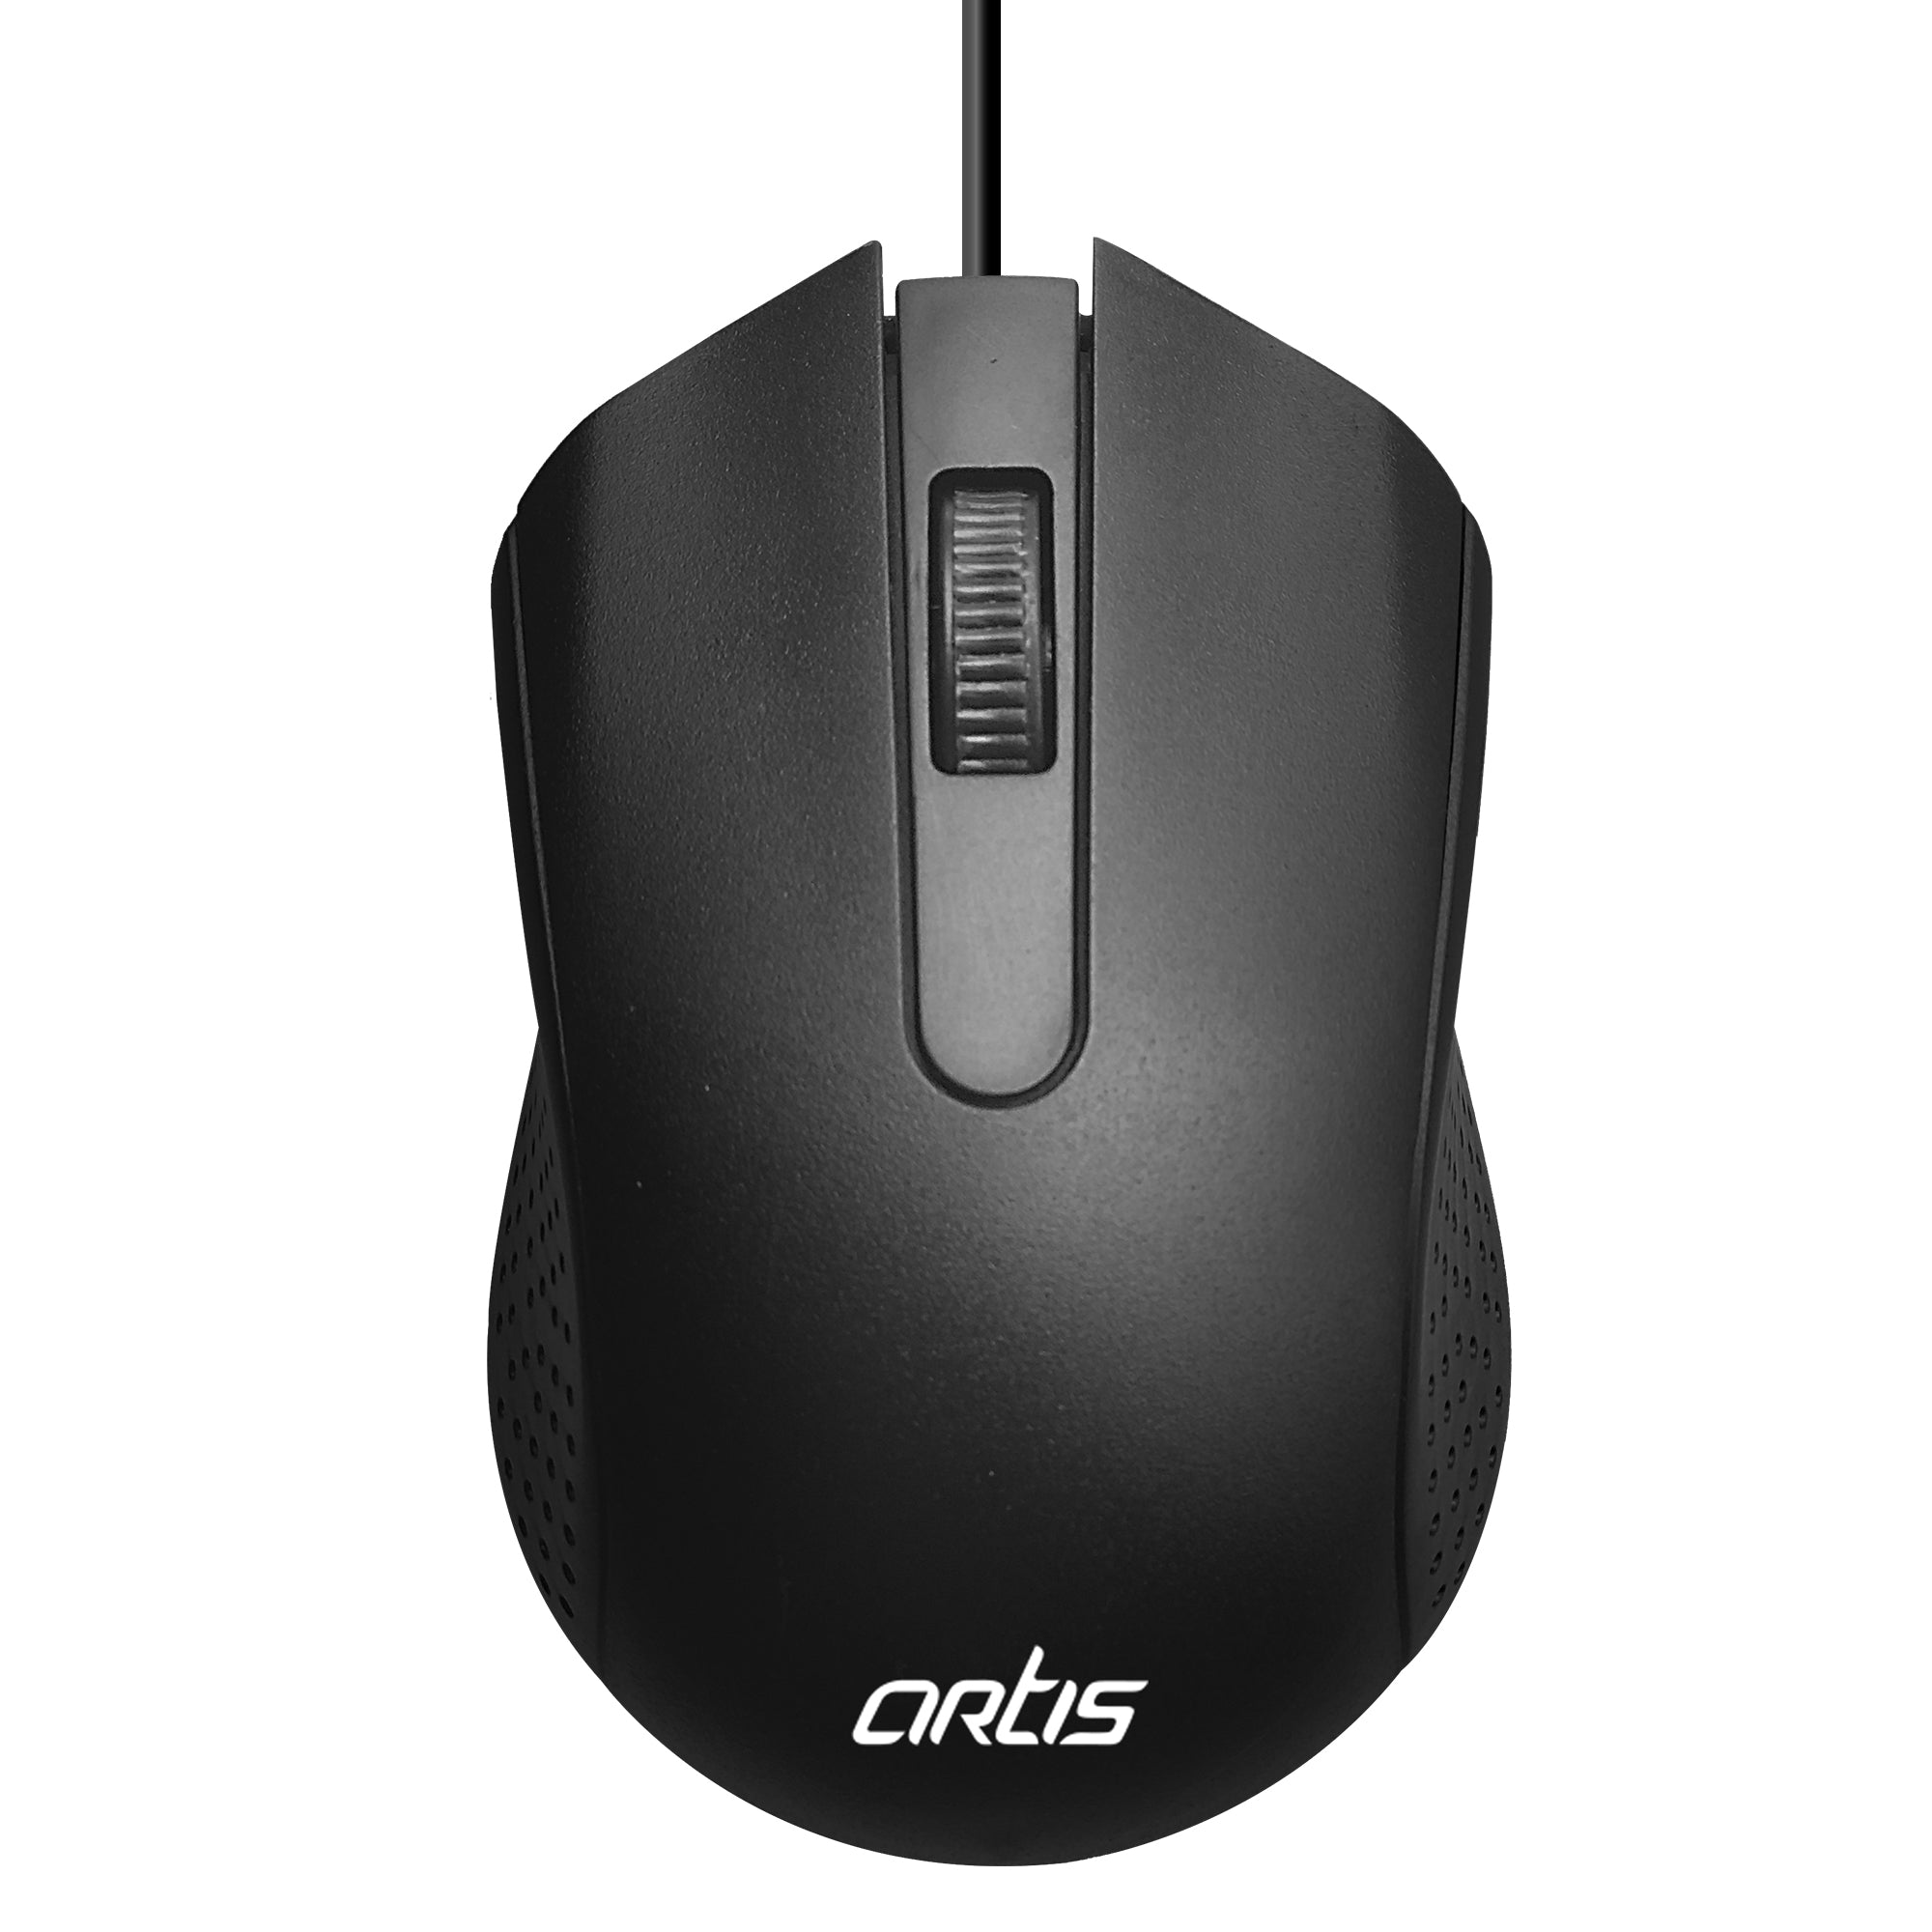 M10 USB Optical Mouse | USB Wired Mouse